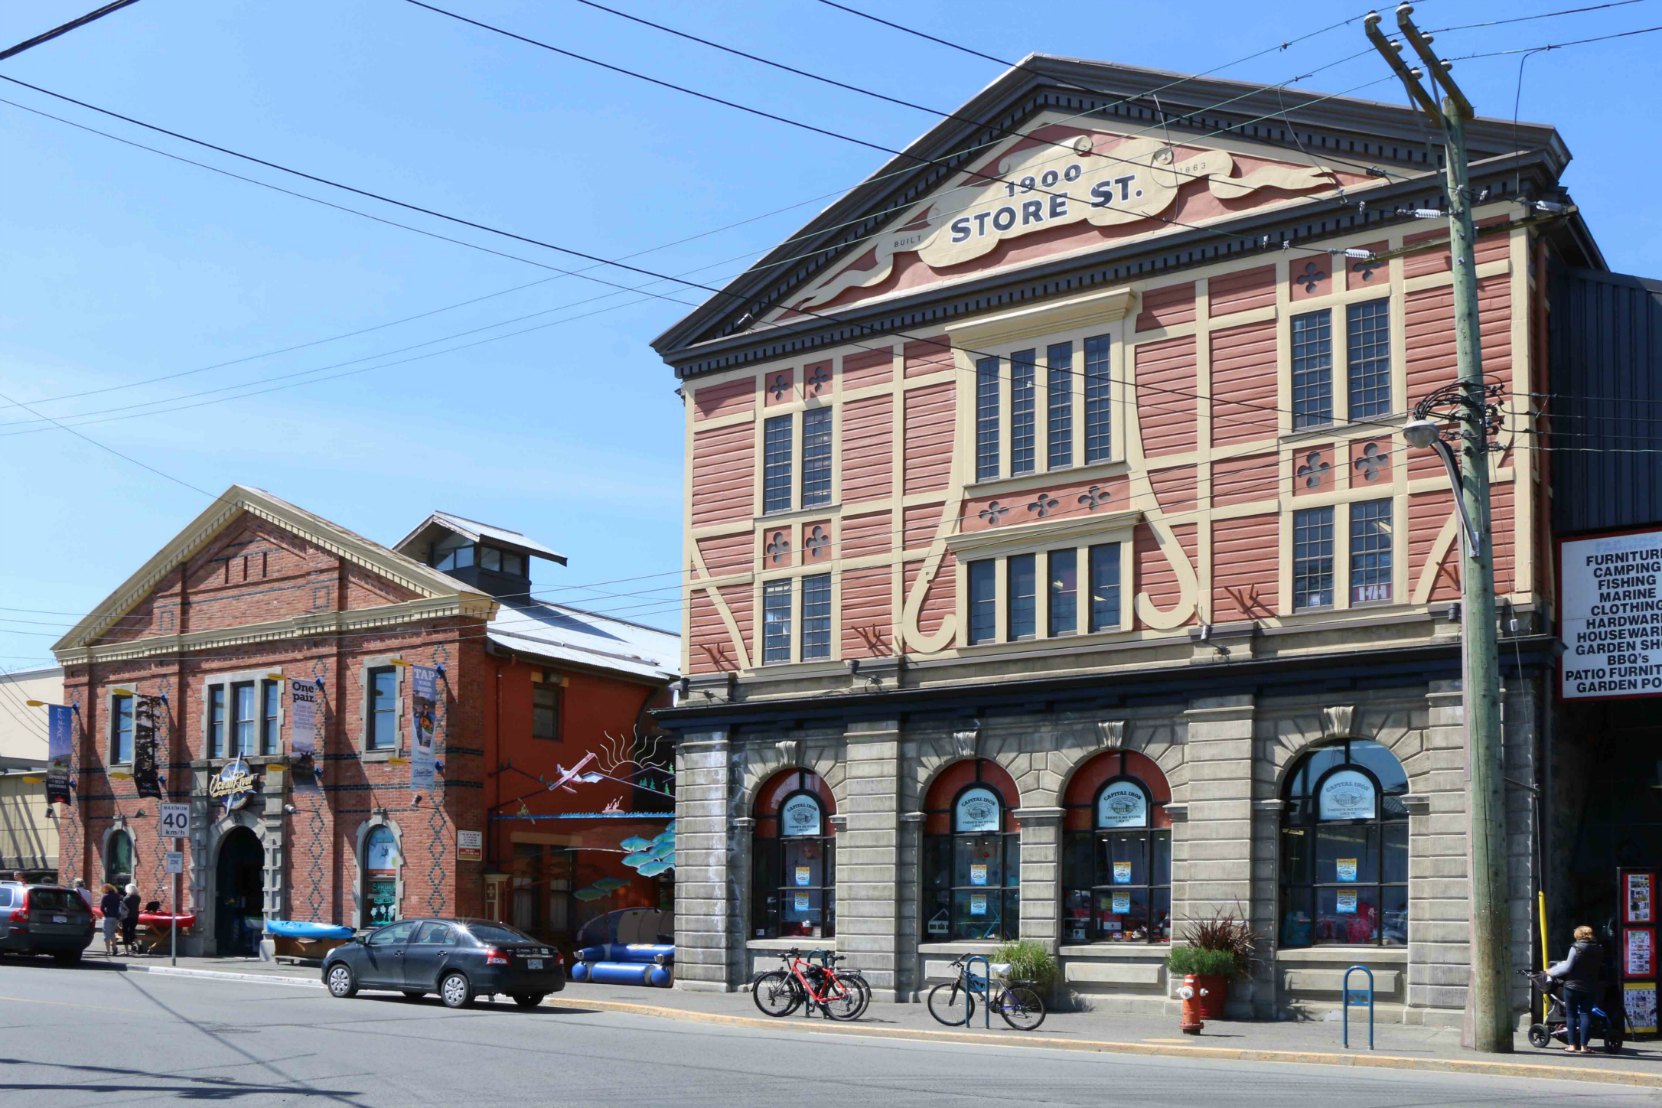 1824 Store Street (left), built in 1890, and 1900 Store Street (right), built in 1862. 